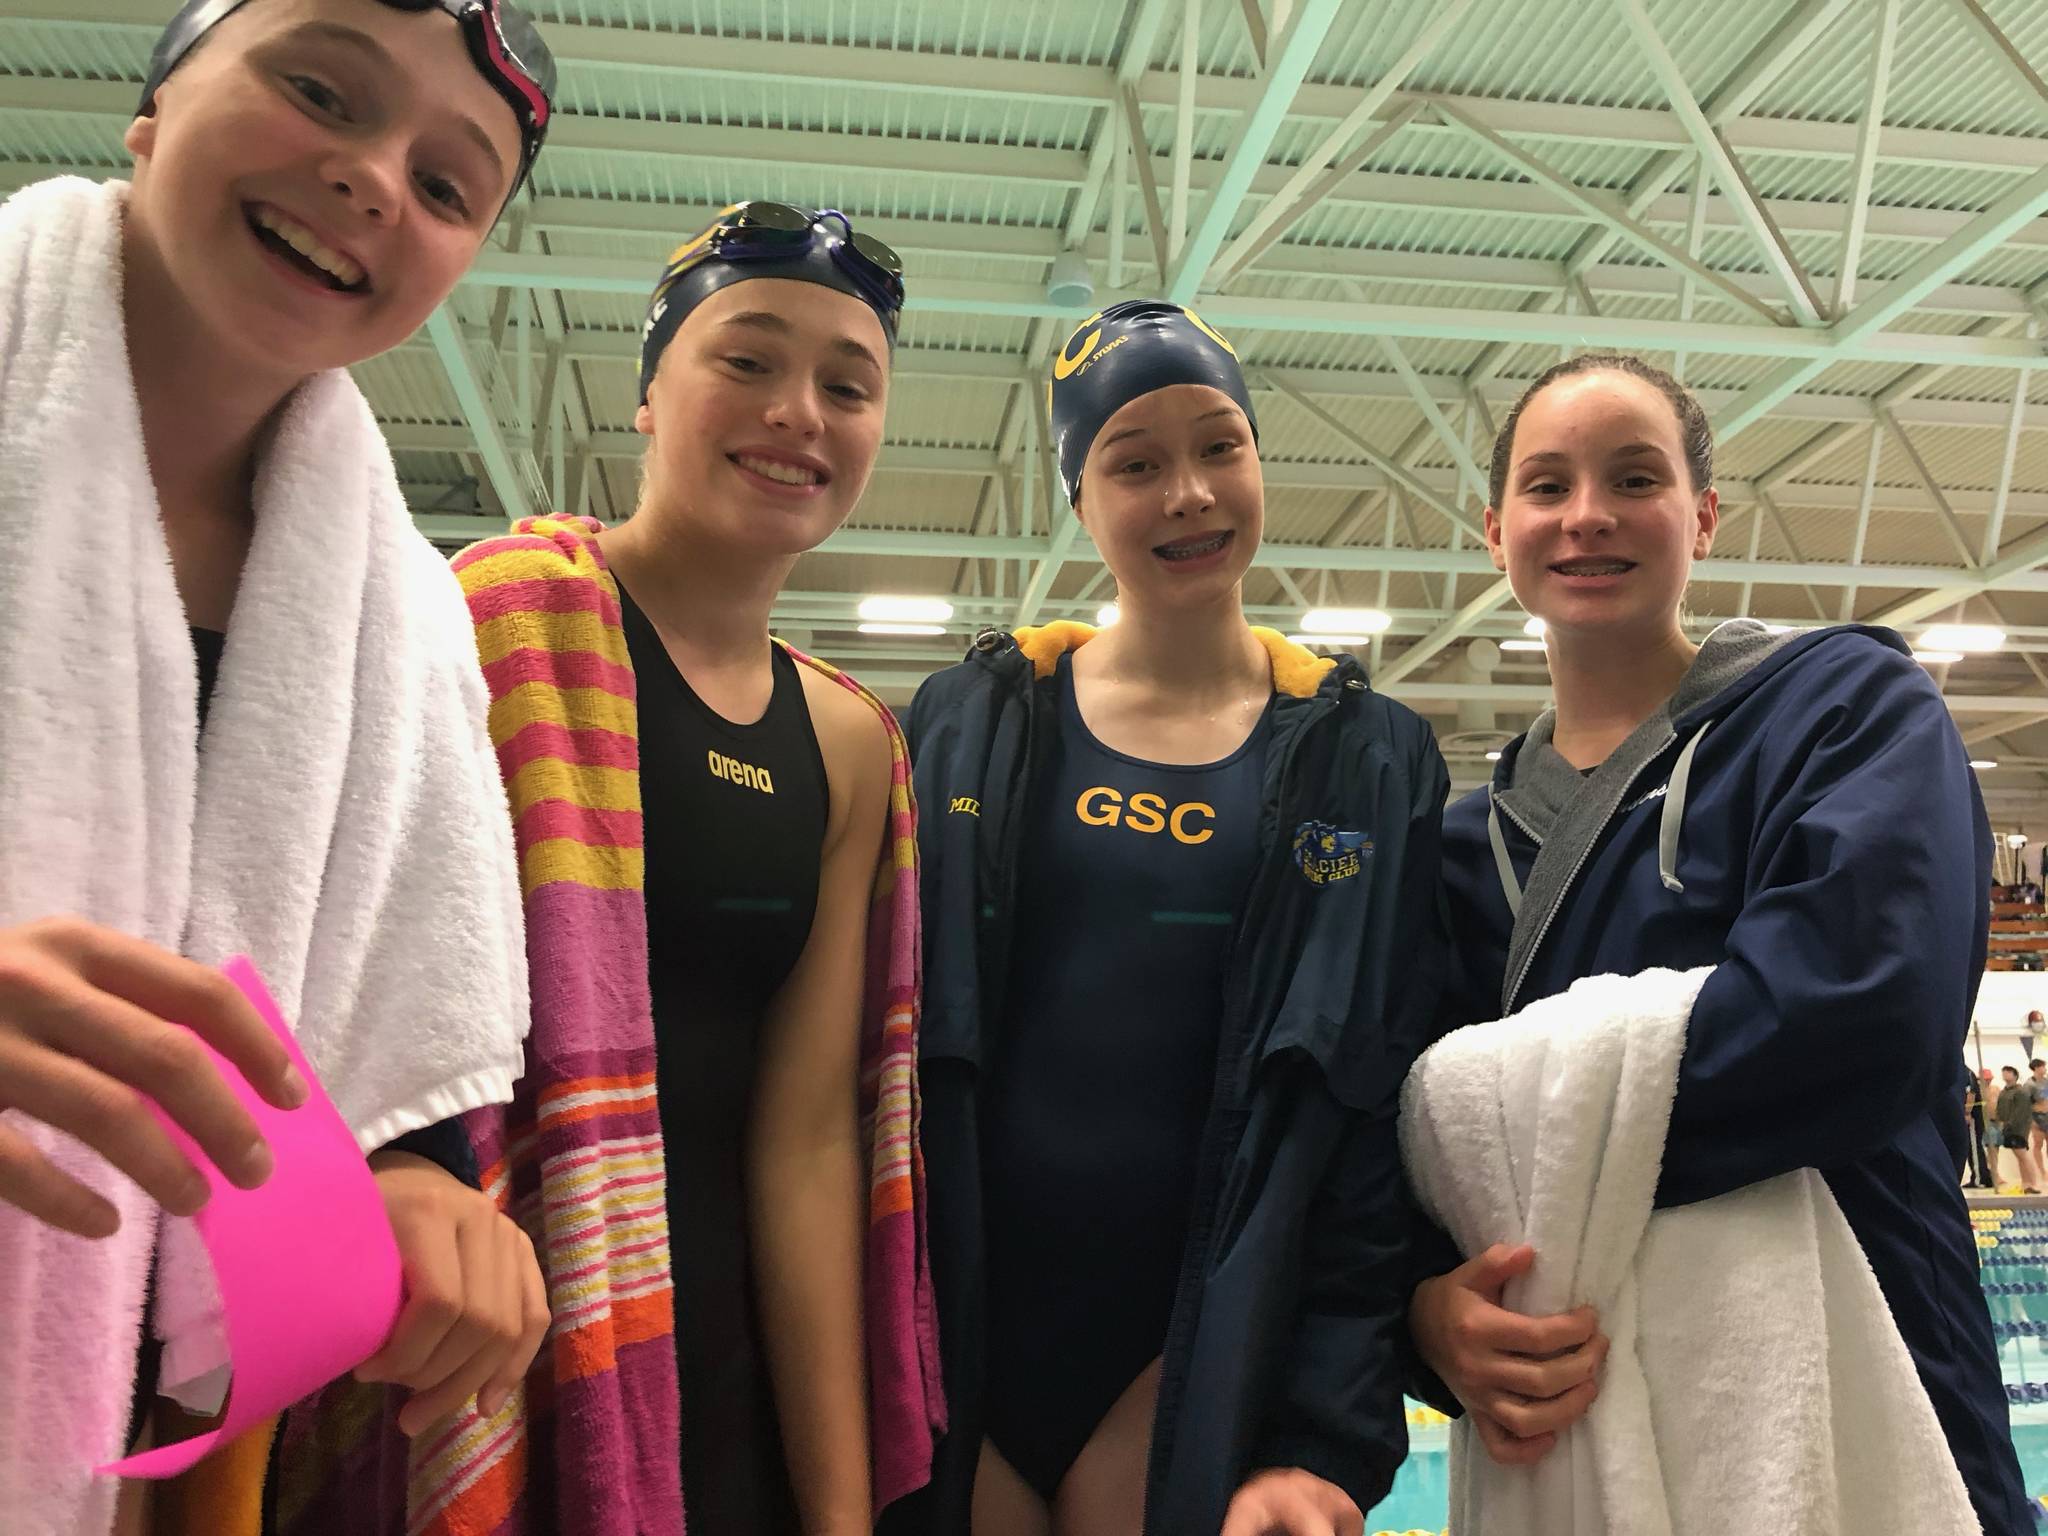 Members of Glacier Swim Club’s winning 13-14 girls 400-meter free relay team from Summer Champs pose for a photo. The team includes Valerie Peimann, Pacific Ricke, Dannan Mills and Caitlin Sanders. (Courtesy Photo)